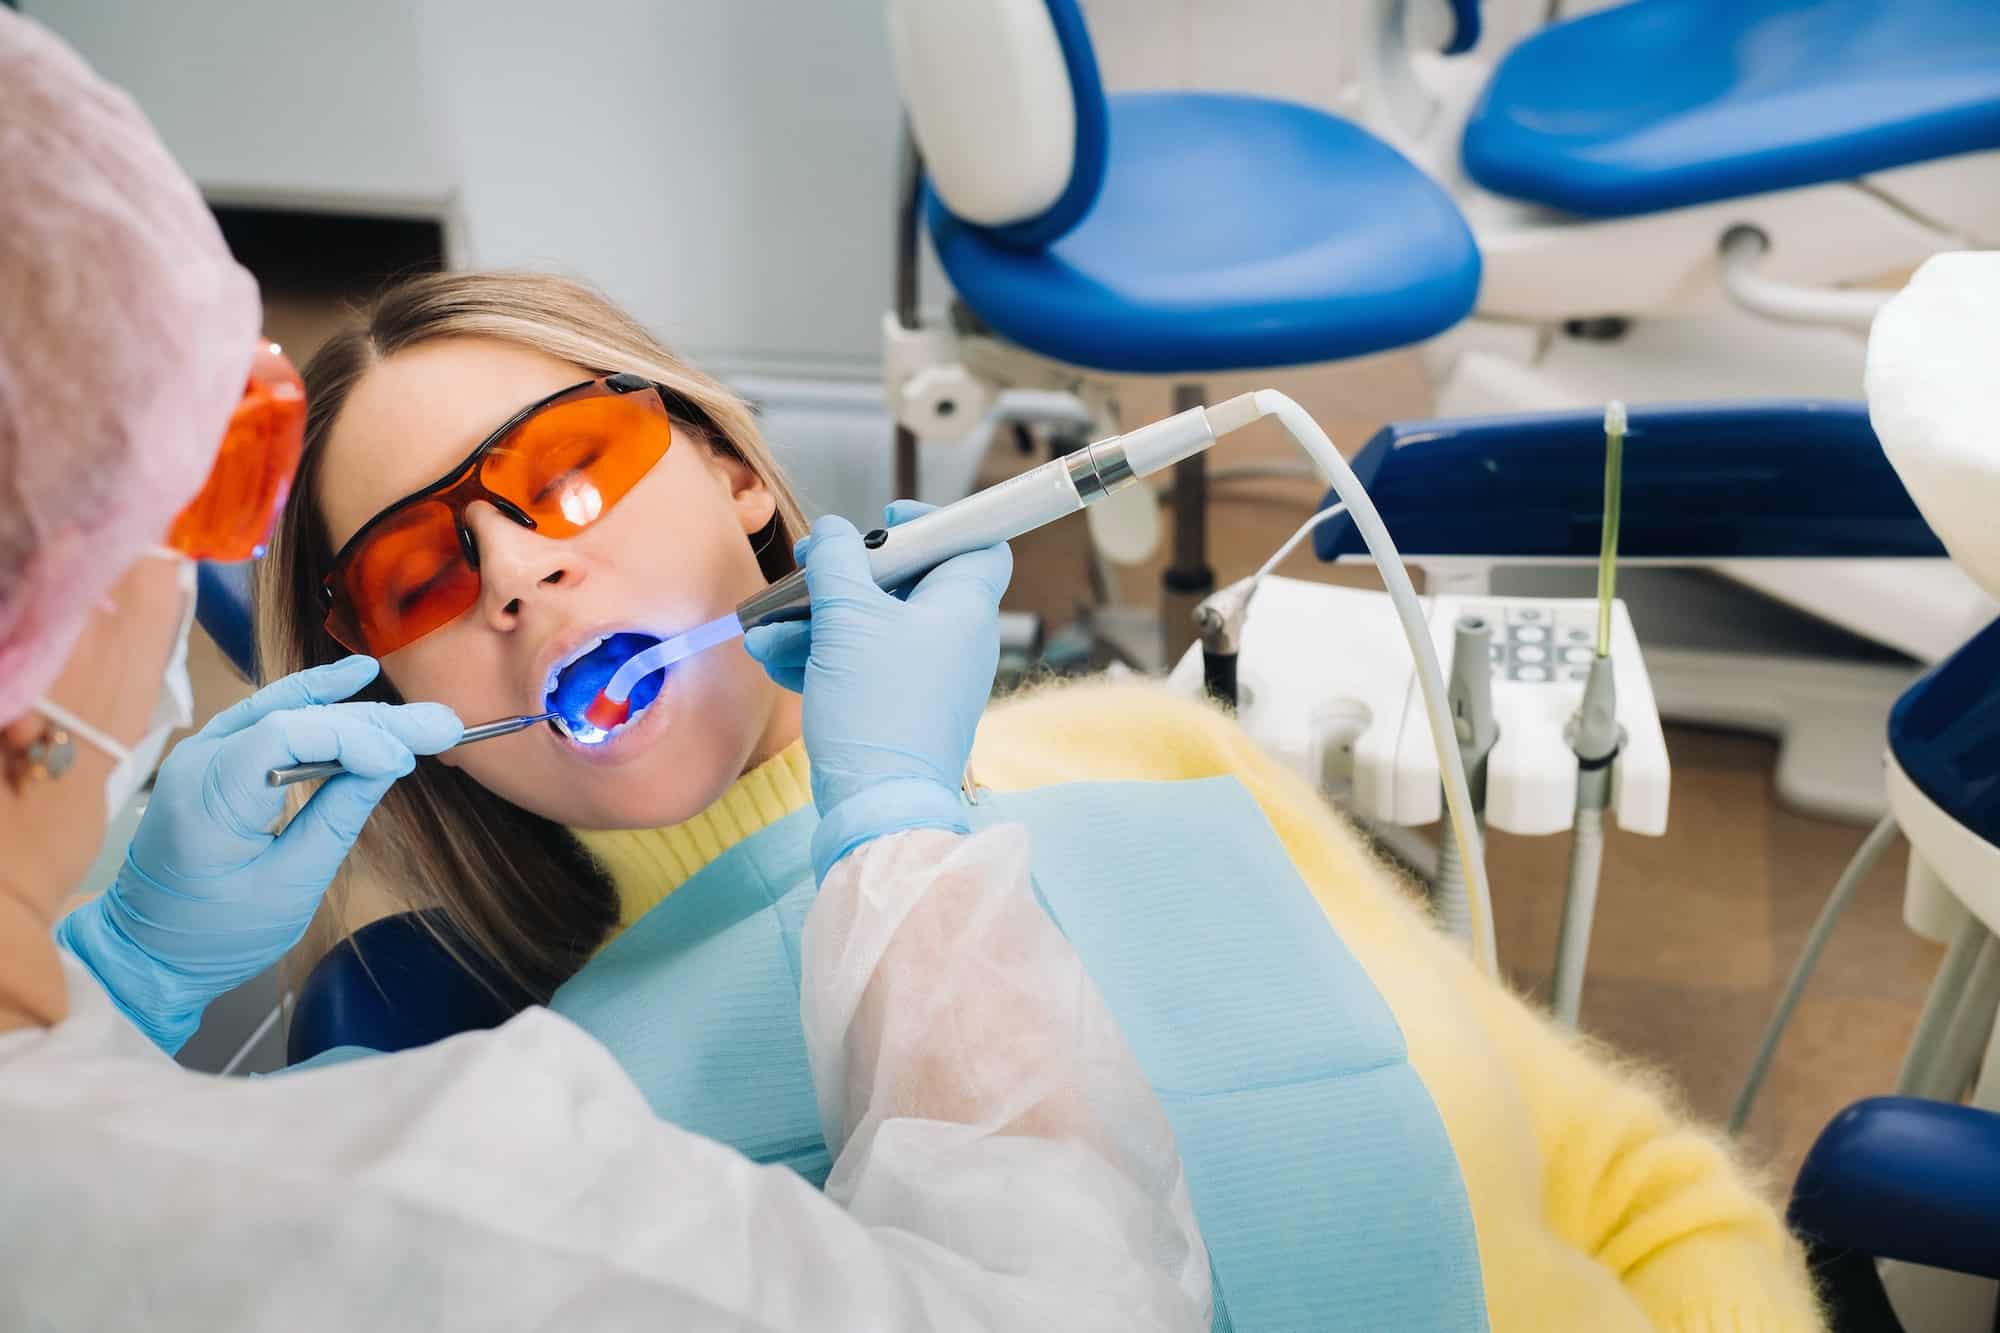 A young beautiful girl in dental glasses treats her teeth at the dentist with ultraviolet light